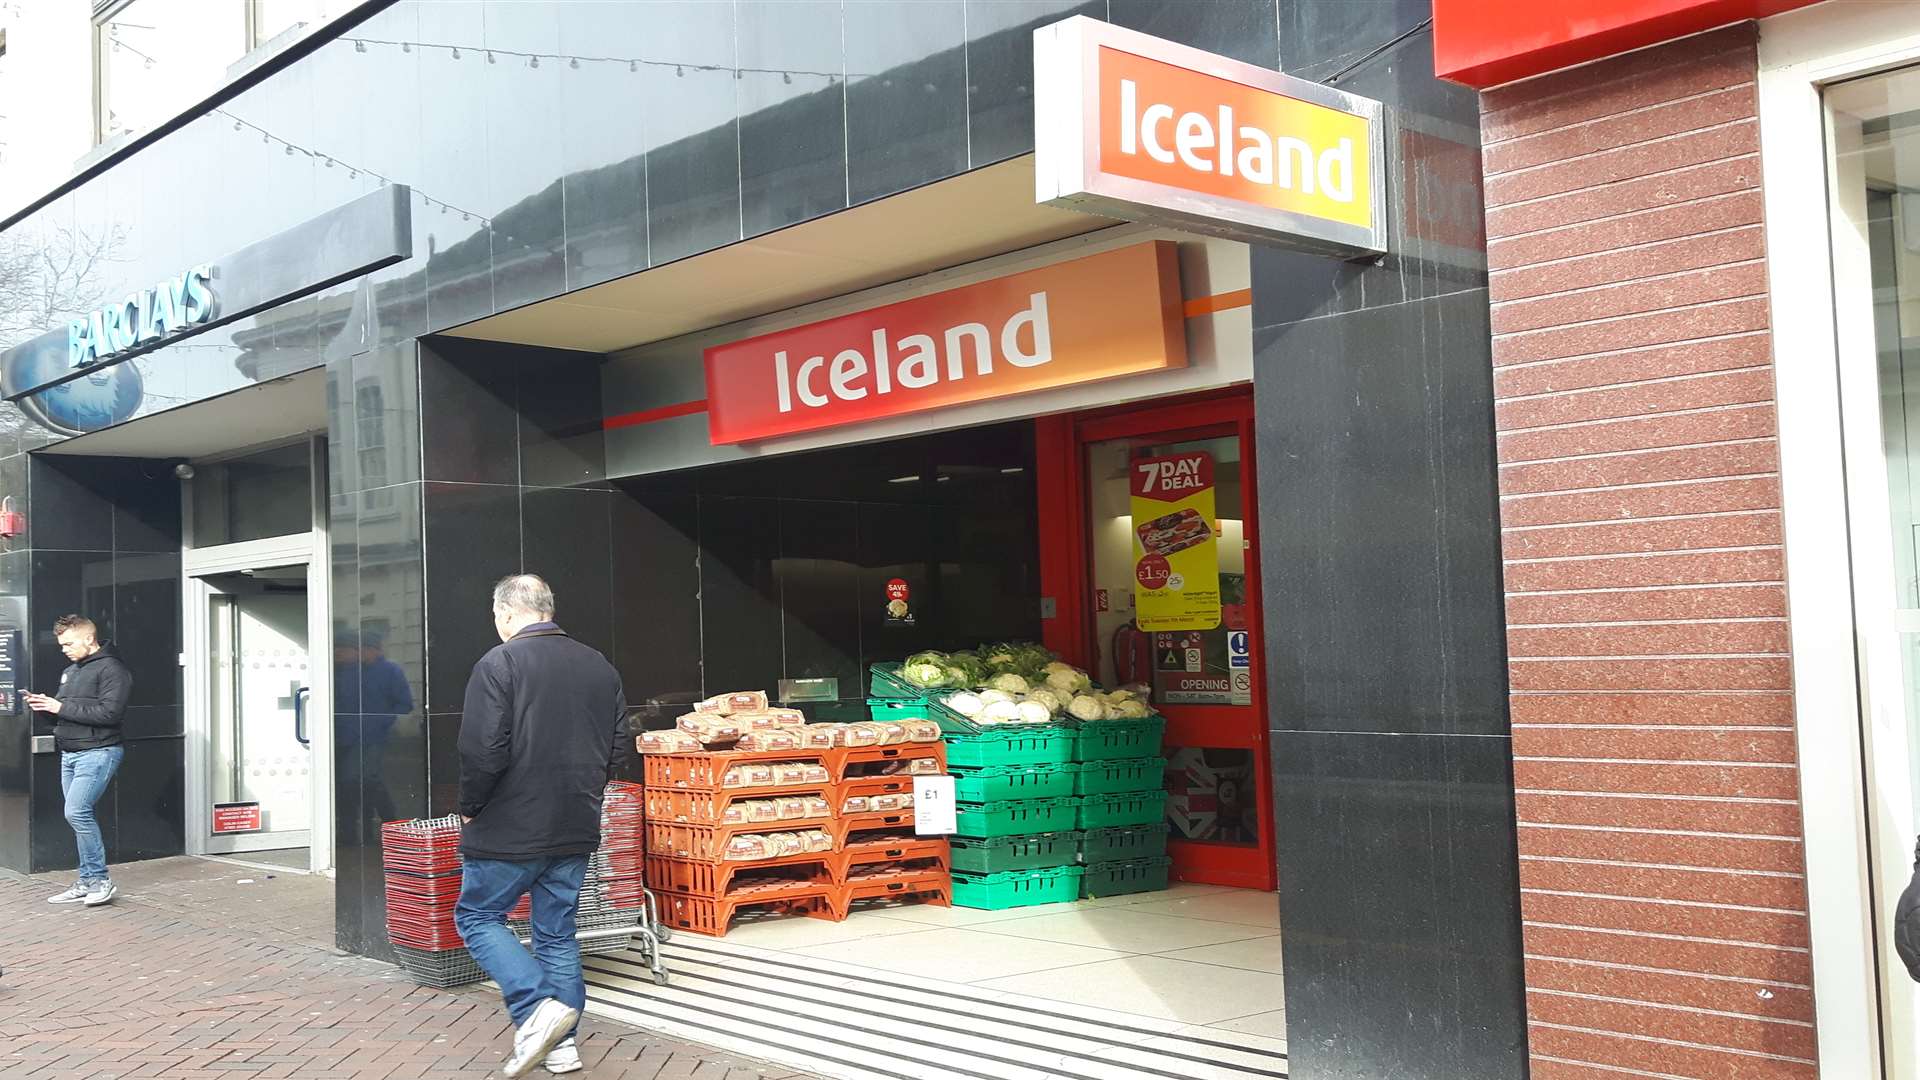 The Iceland store in Ashford High Street